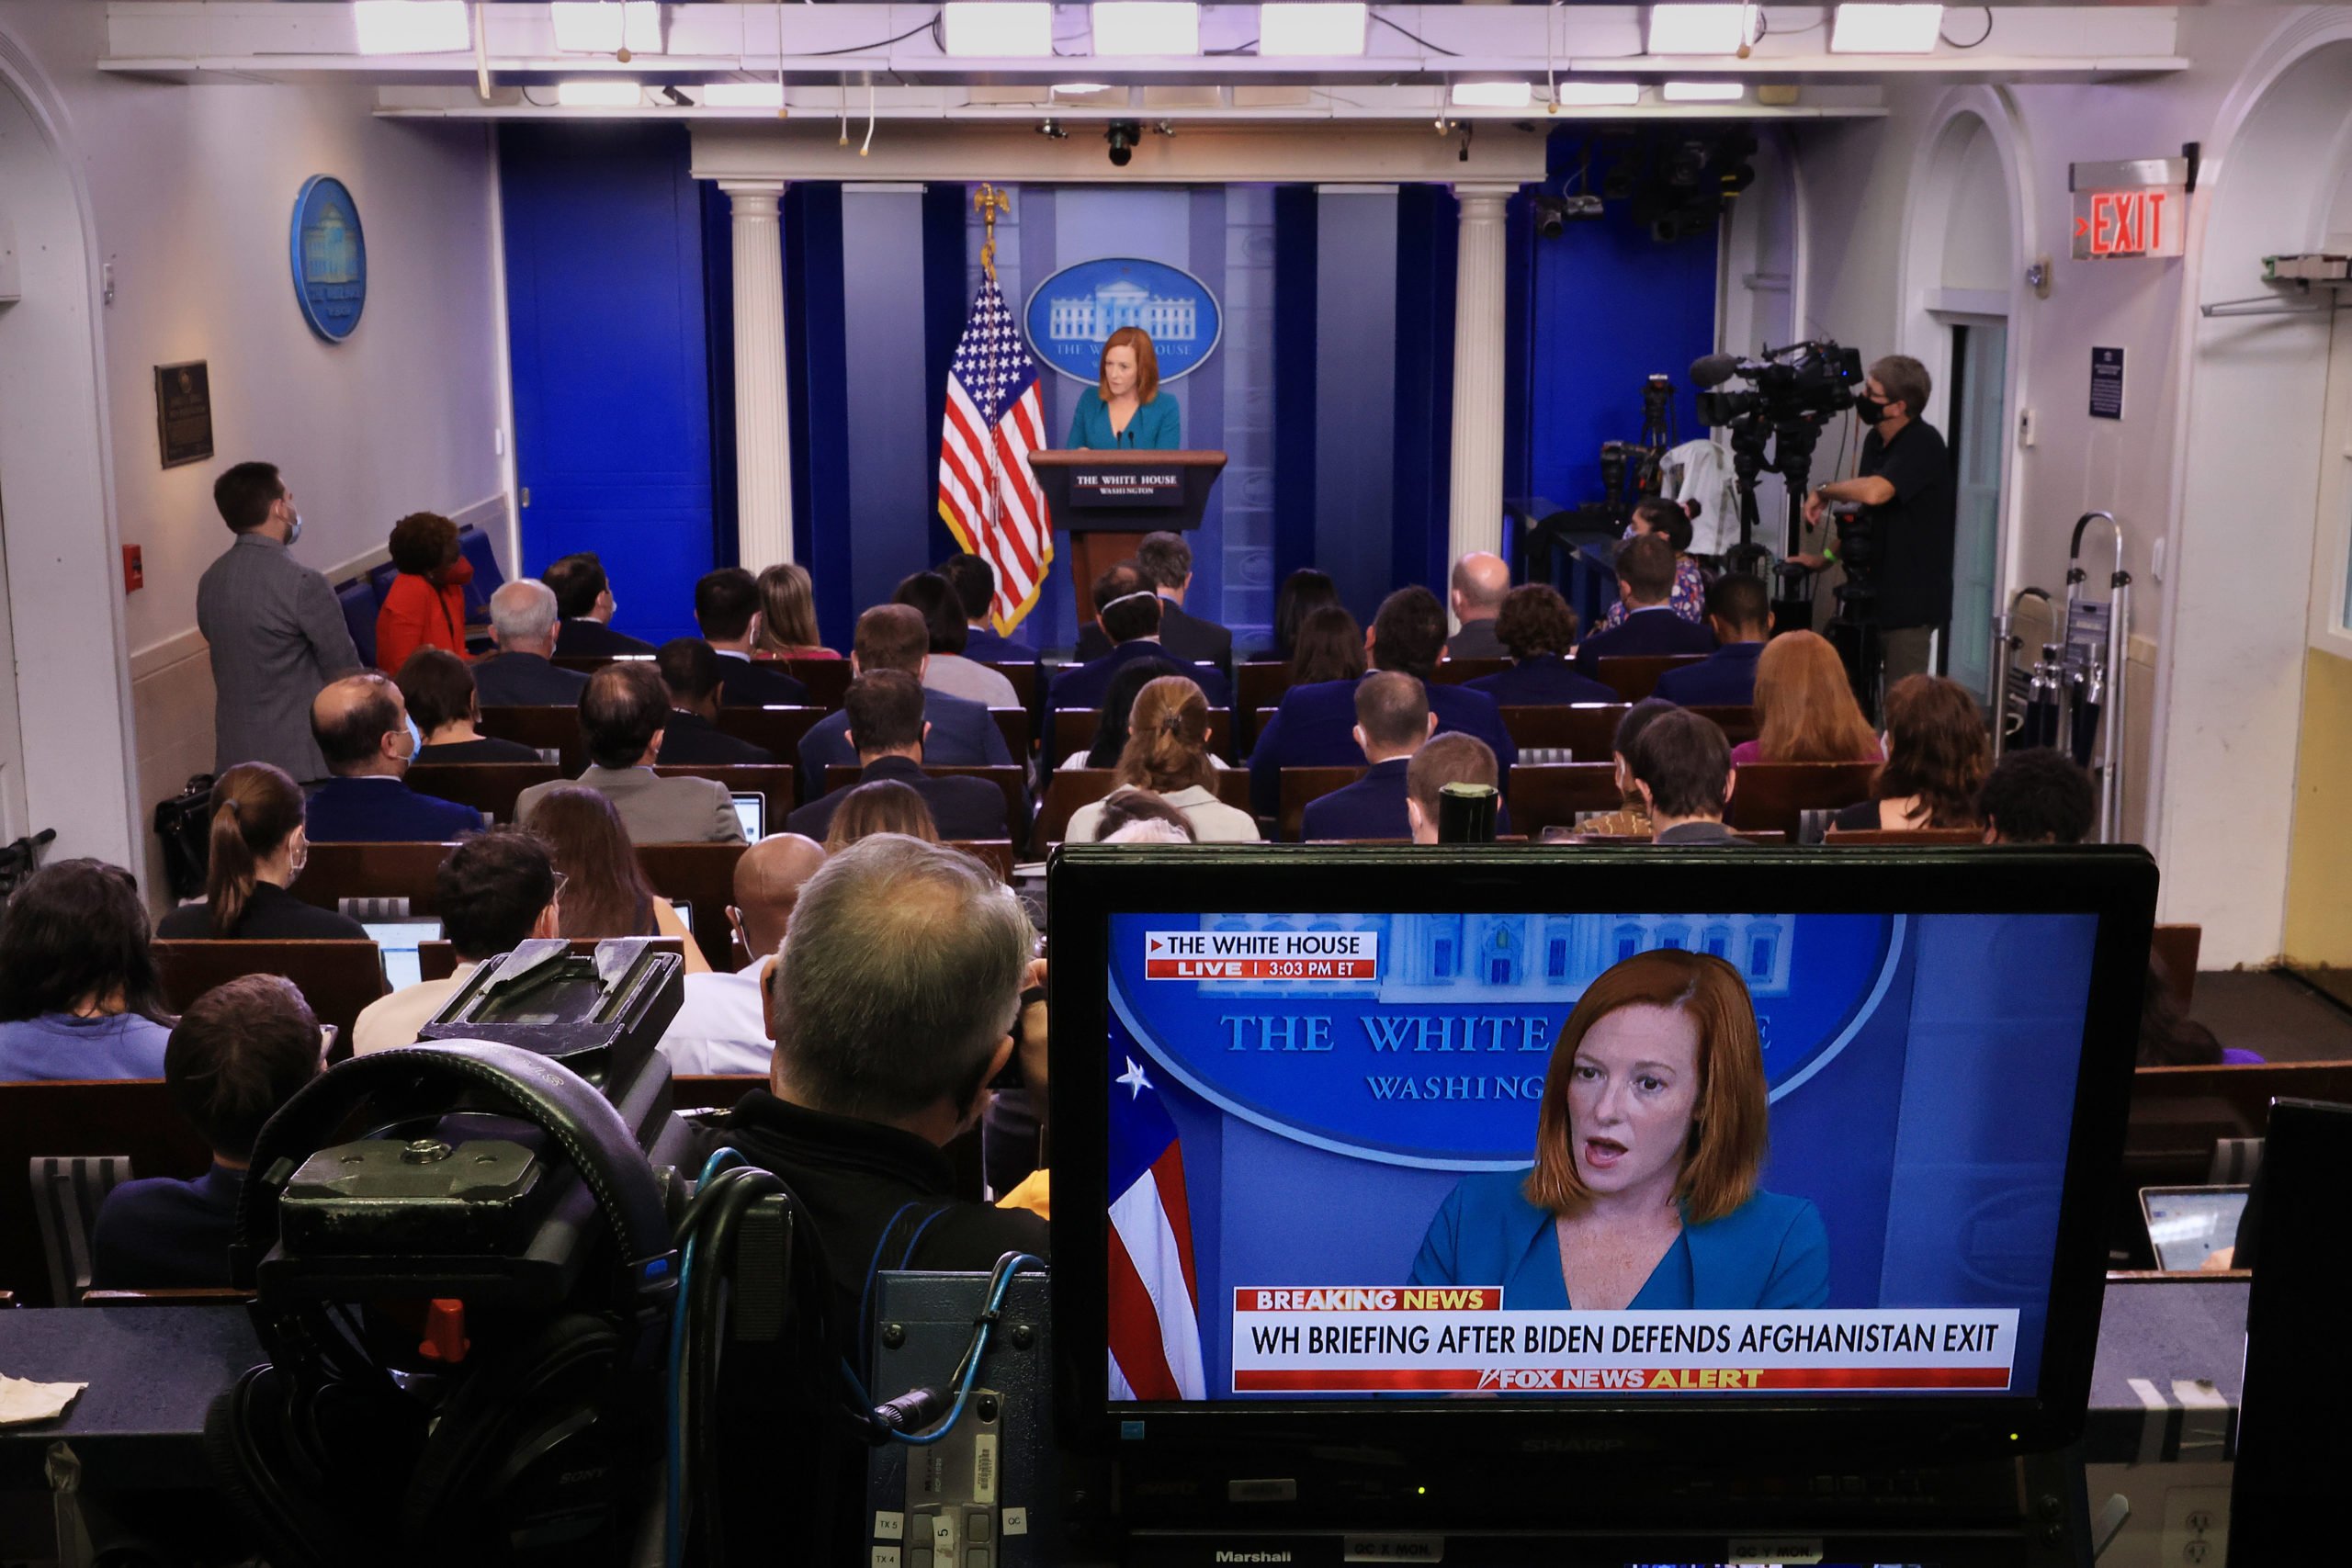 White House Press Secretary Jen Psaki talks to reporters during the daily news conference in the Brady Press Briefing Room at the White House on September 01, 2021 in Washington, DC. Psaki faced questions about the withdrawal of the U.S. military from Afghanistan, the federal response to Hurricane Ida, the ongoing coronavirus pandemic and other topics. (Photo by Chip Somodevilla/Getty Images)